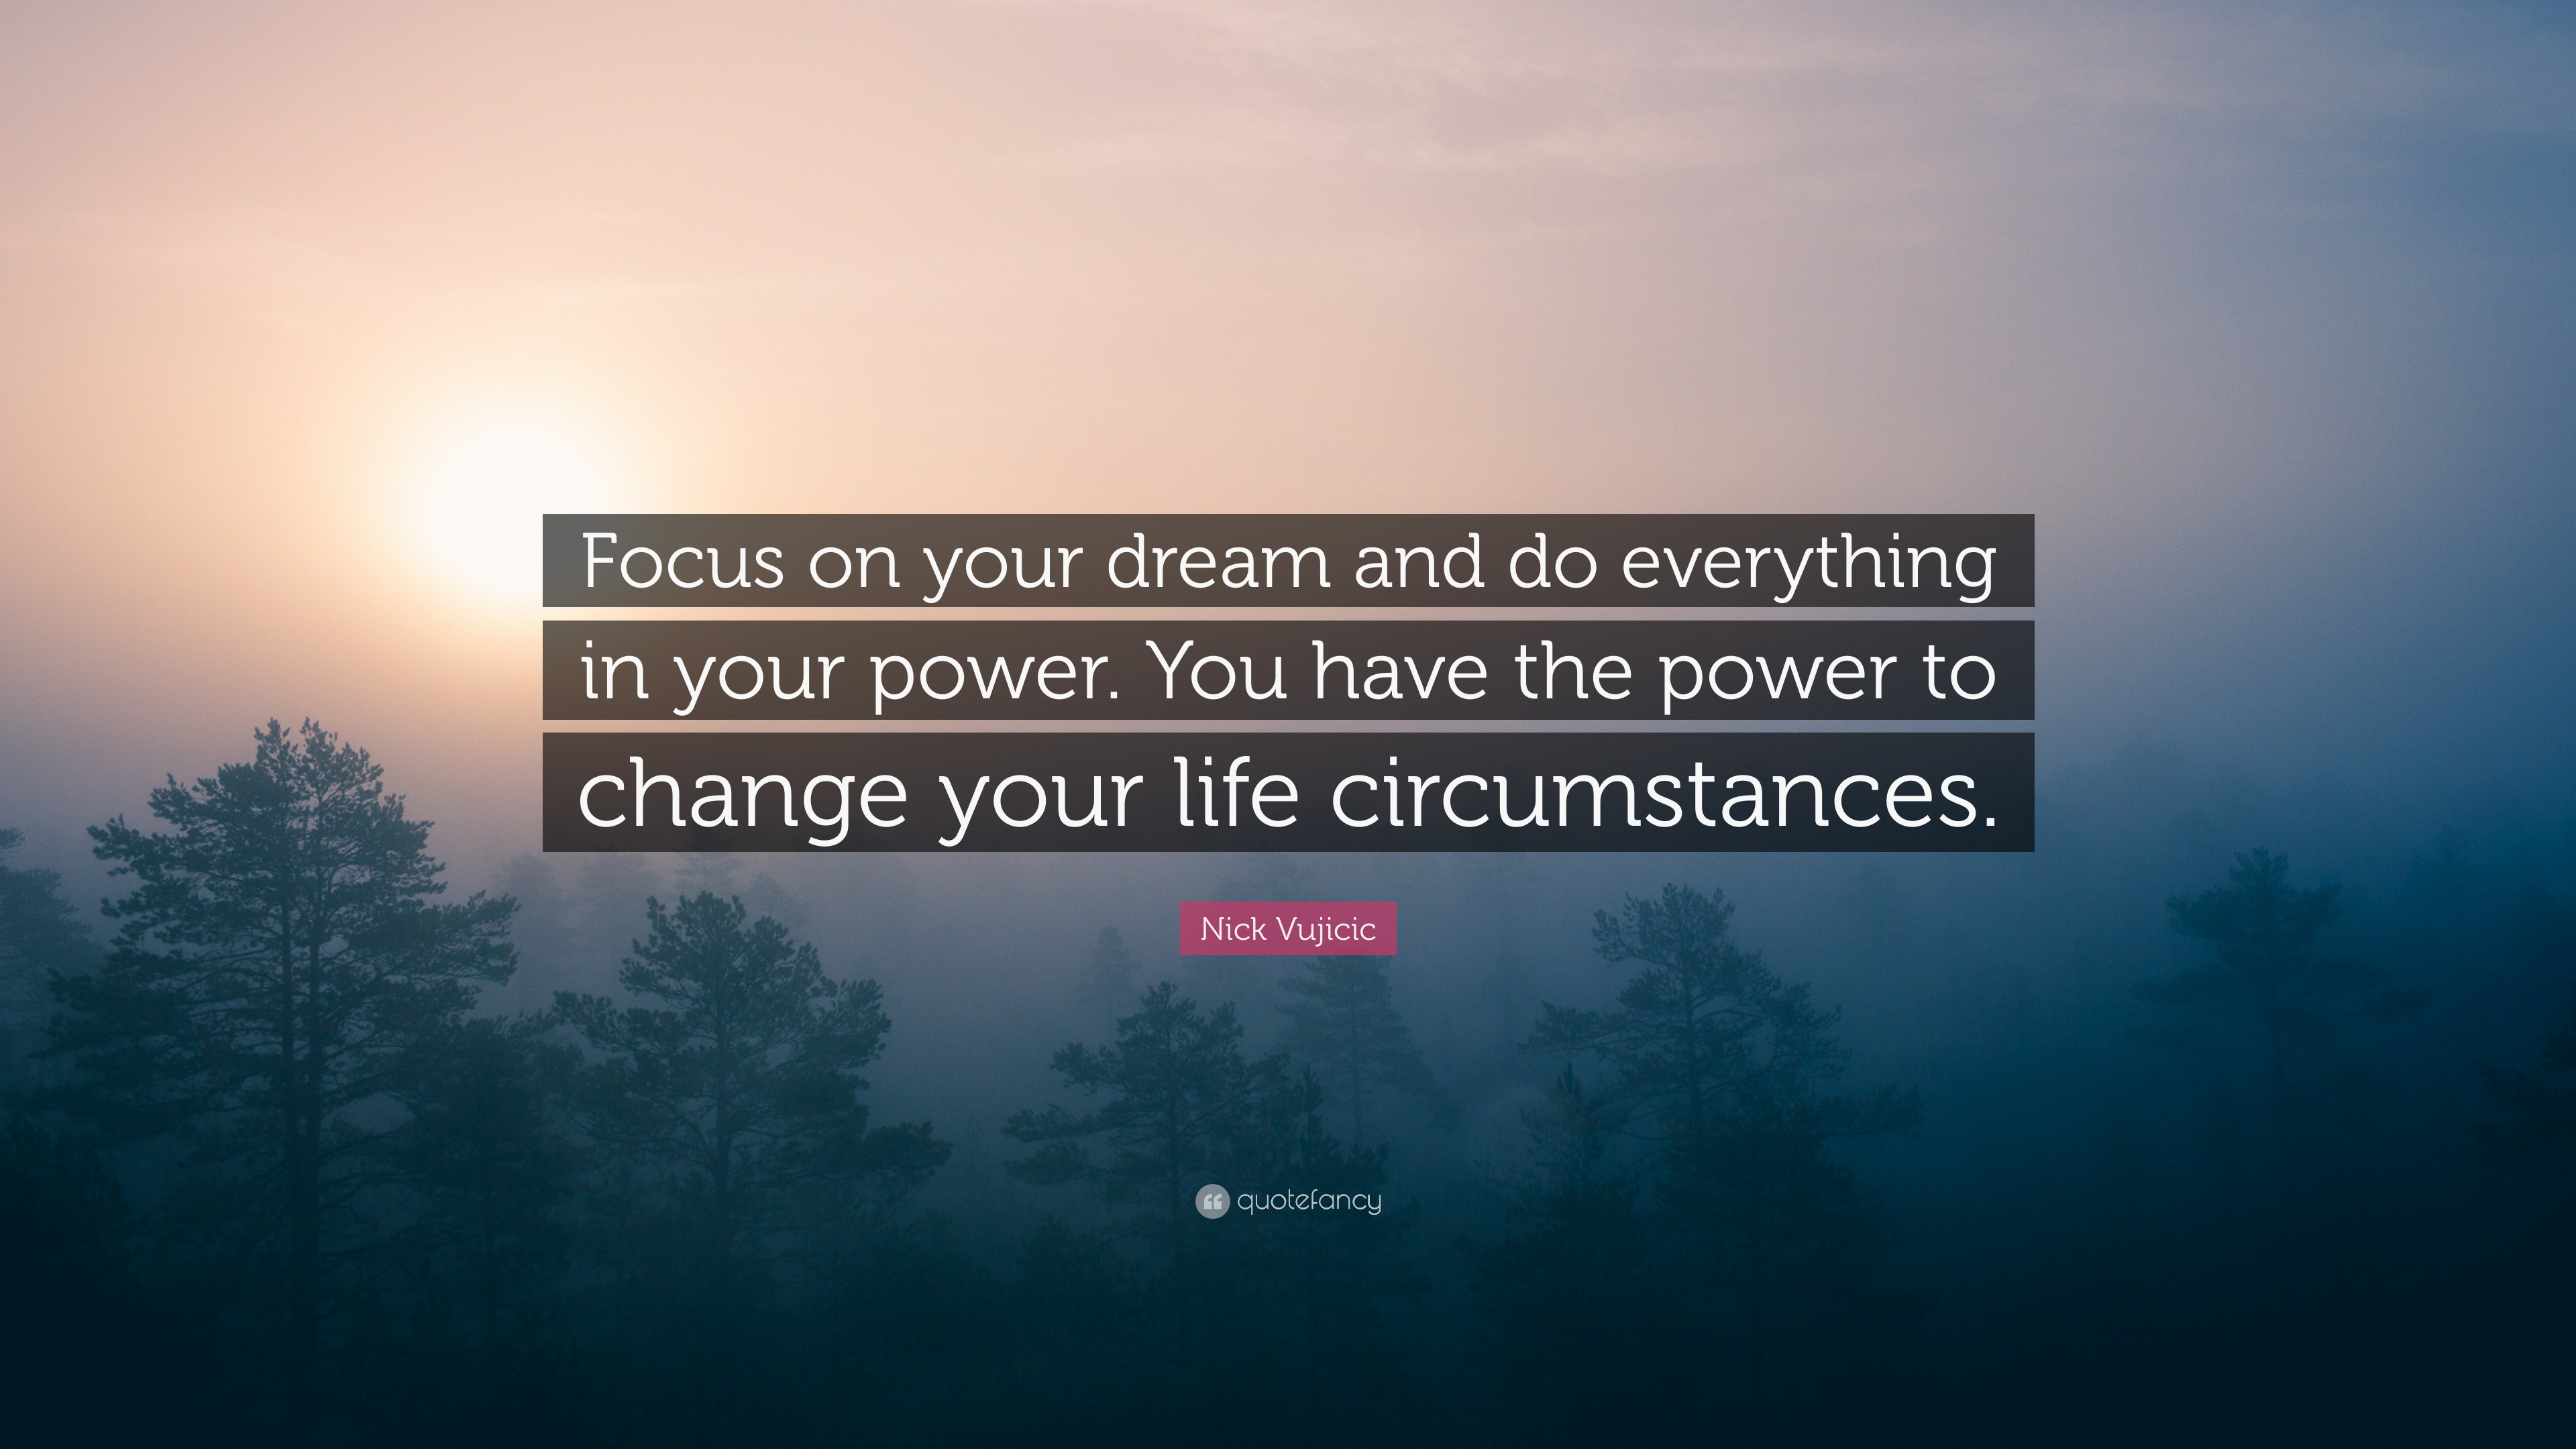 Nick Vujicic Quote: “Focus on your dream and do everything in your